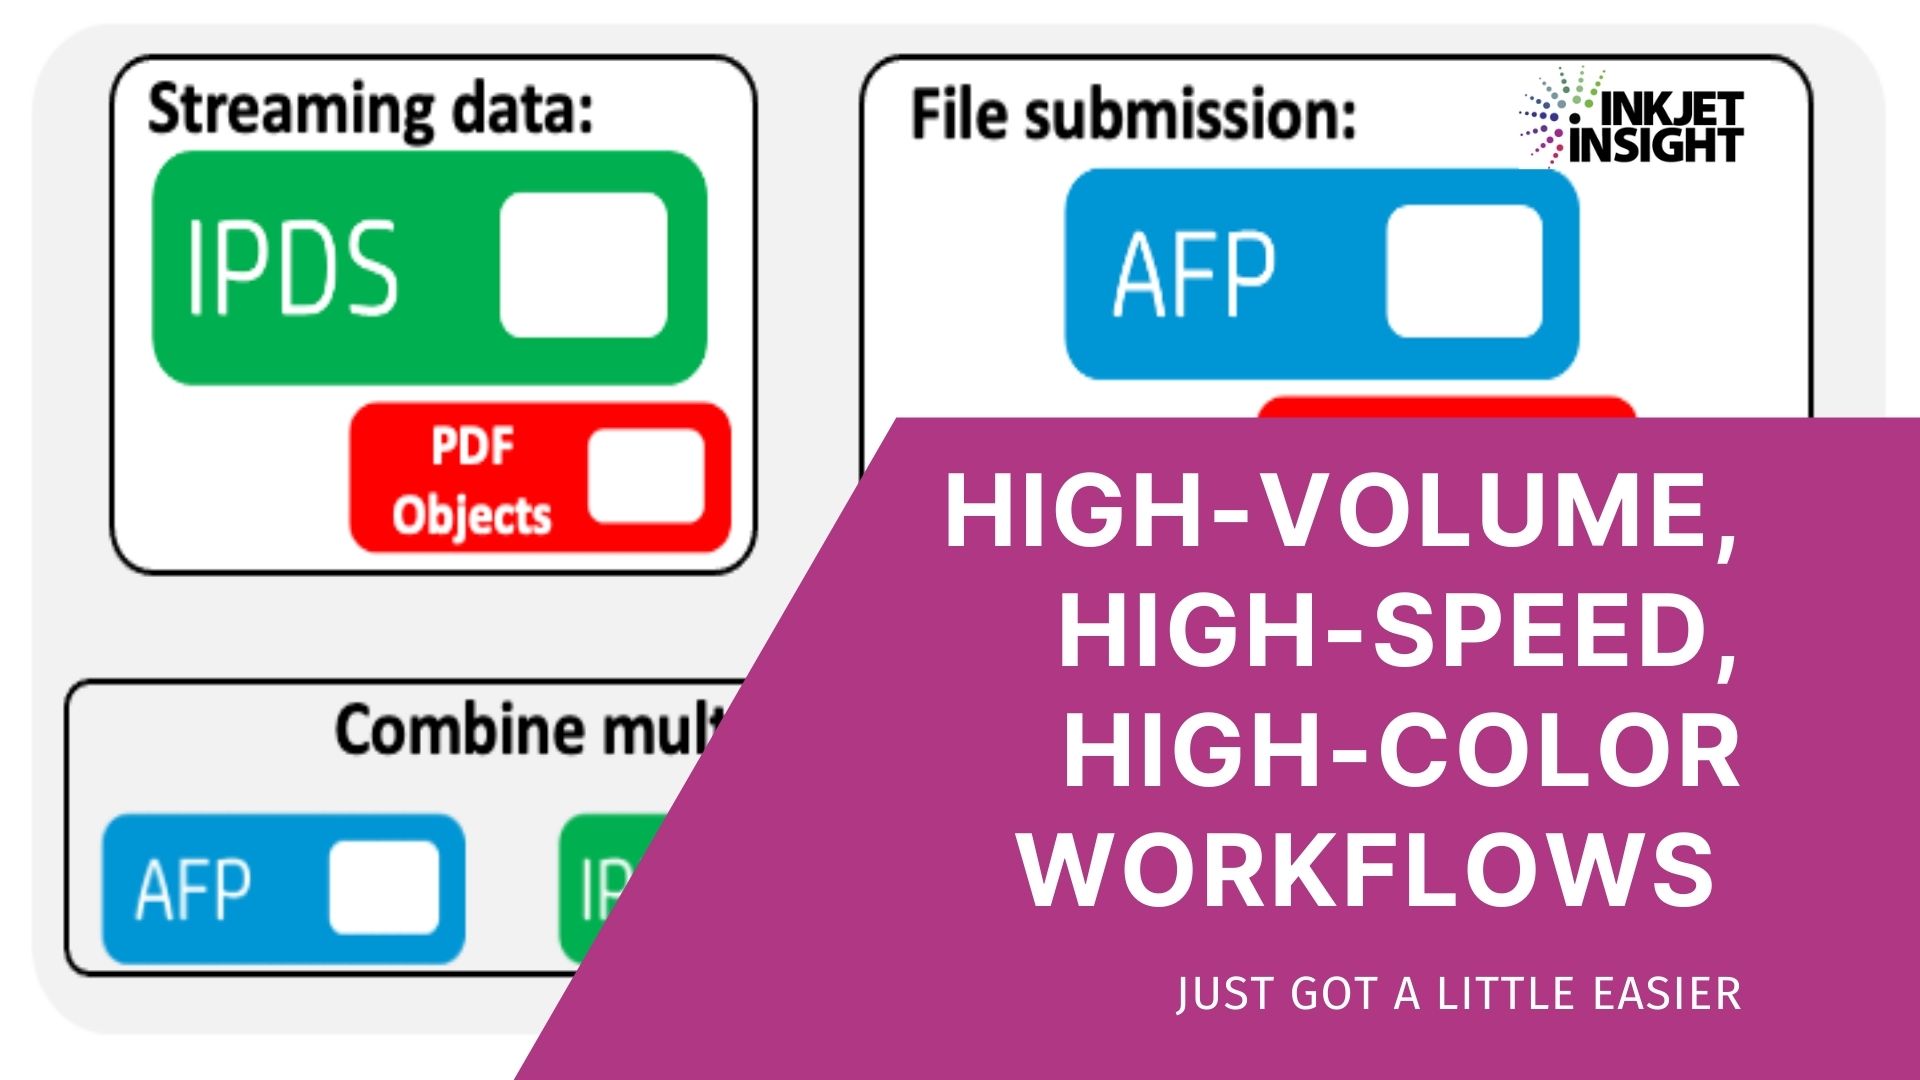 Featured image for “High-Volume, High-Speed, High-Color Workflows Just Got a Little Easier”